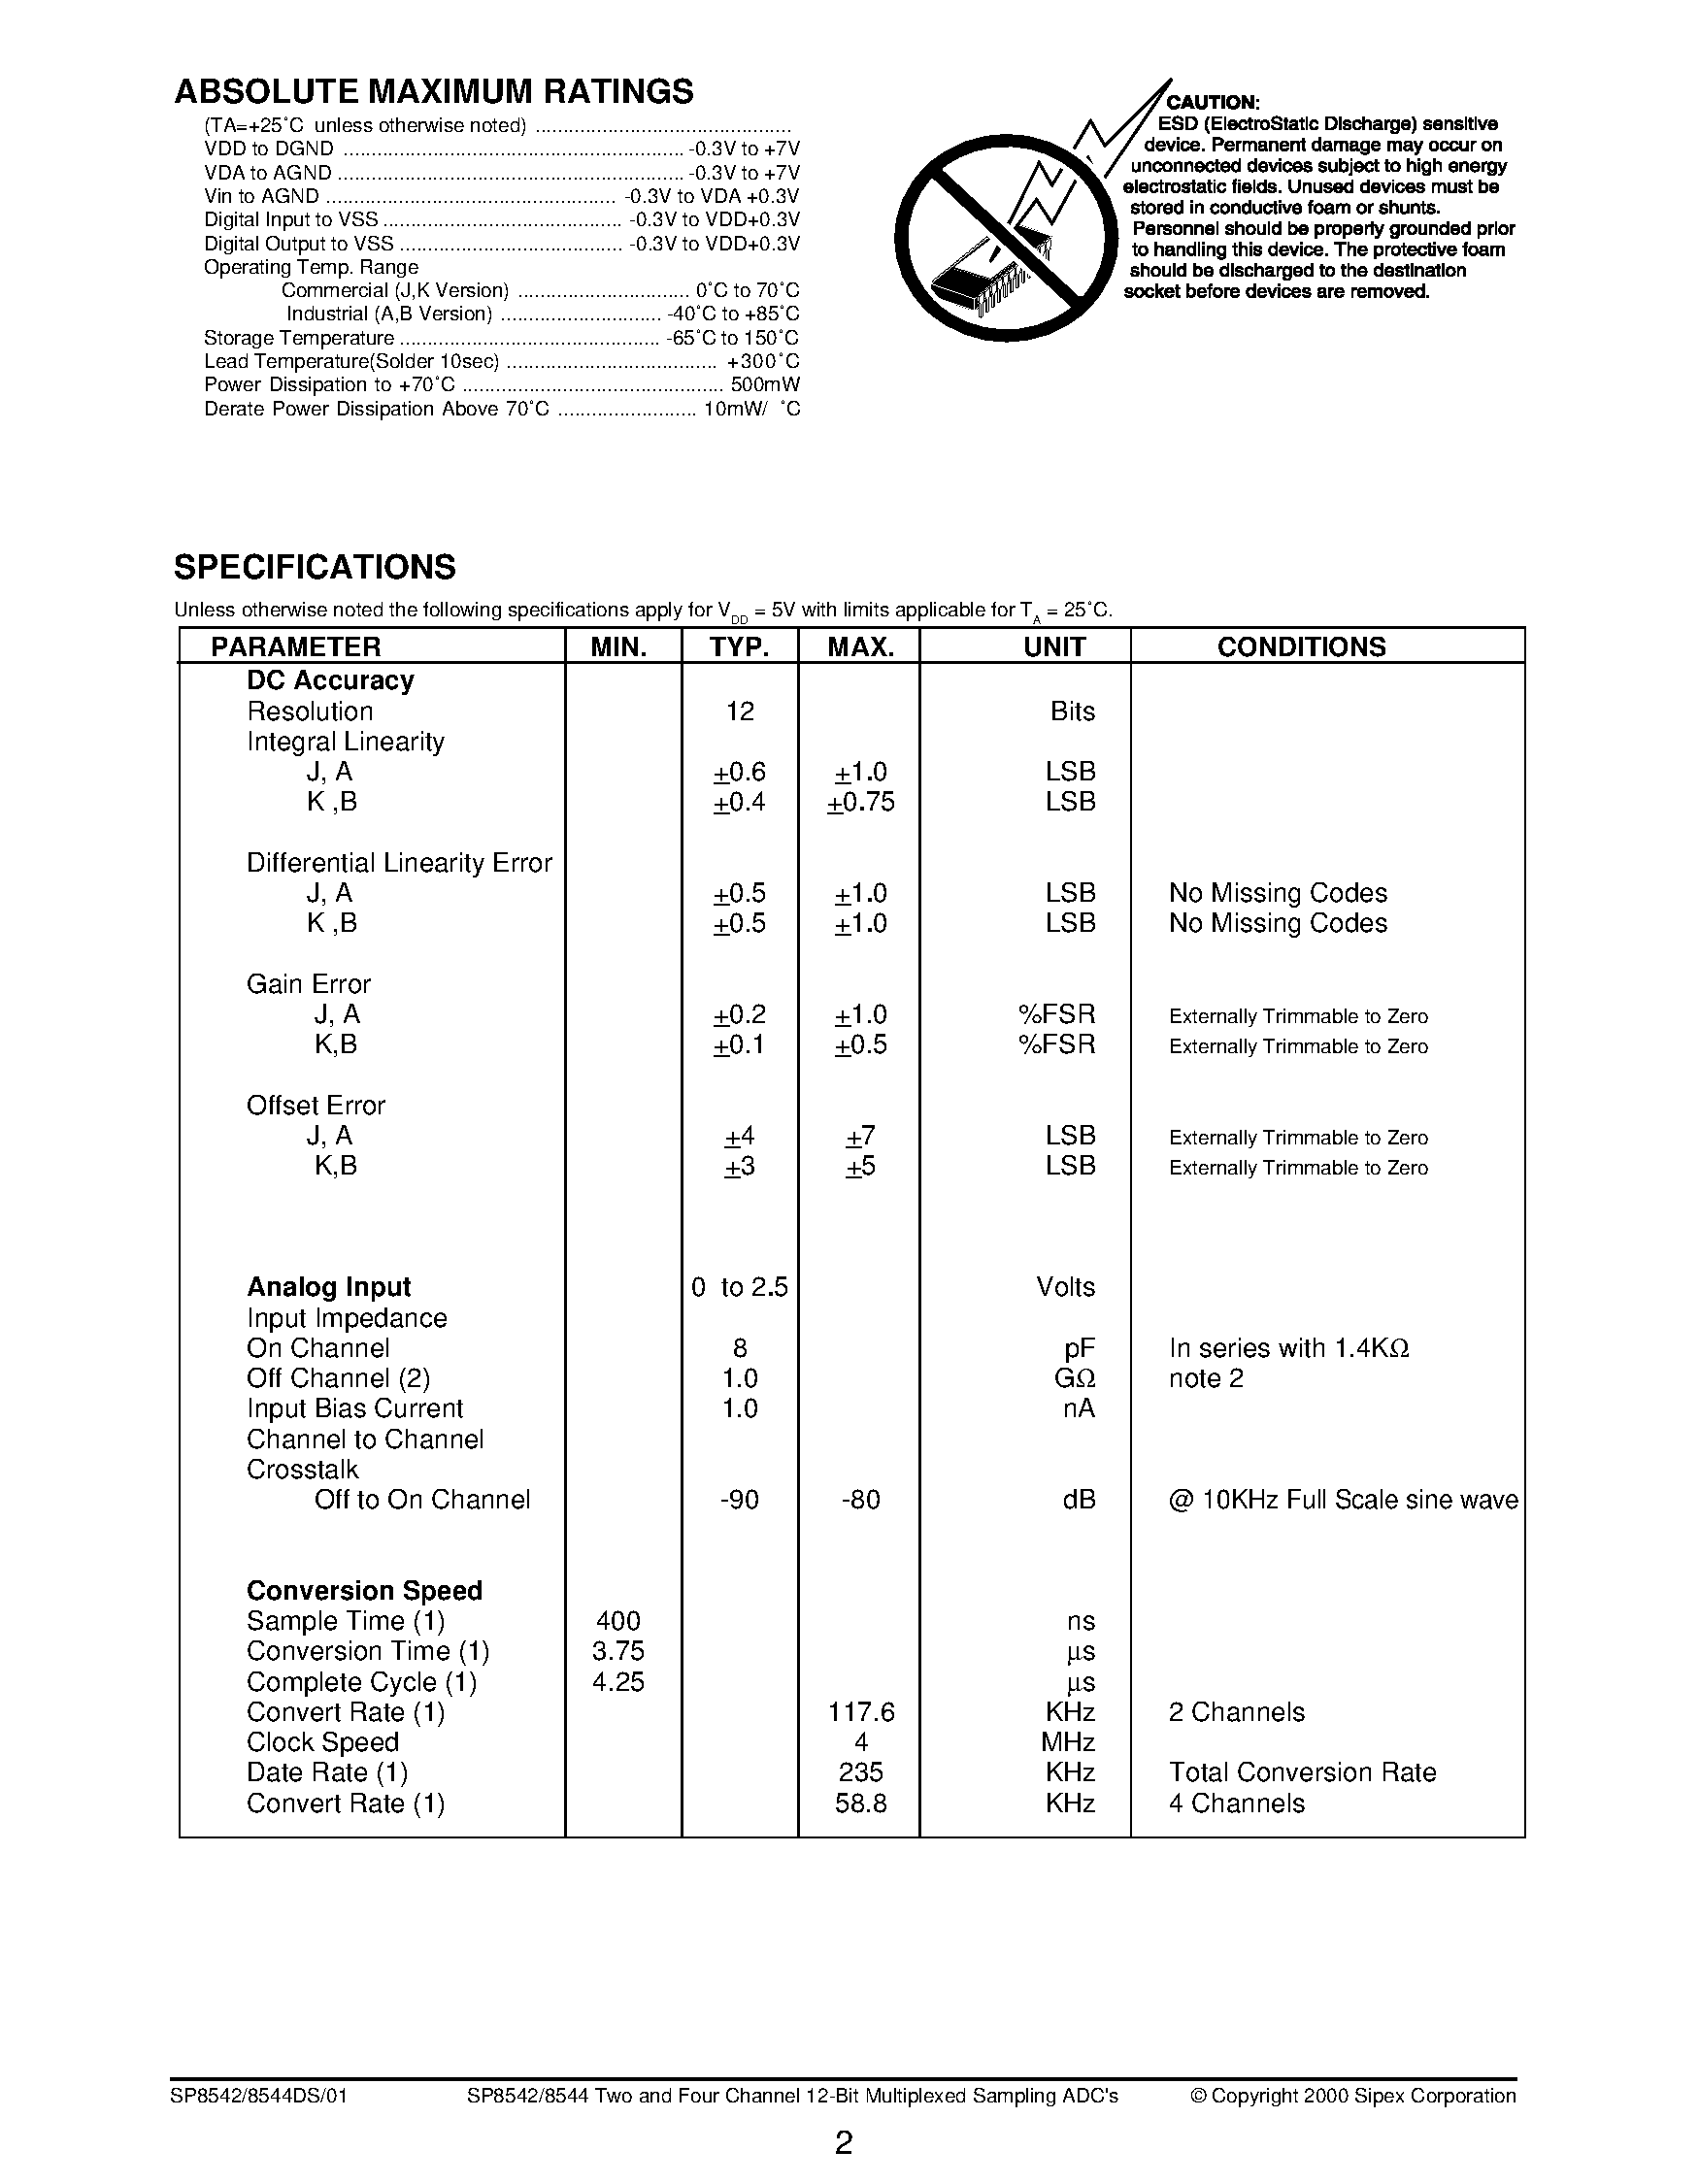 Datasheet SP8544KS - Two and Four Channel 12-Bit Multiplexed Sampling ADCs page 2